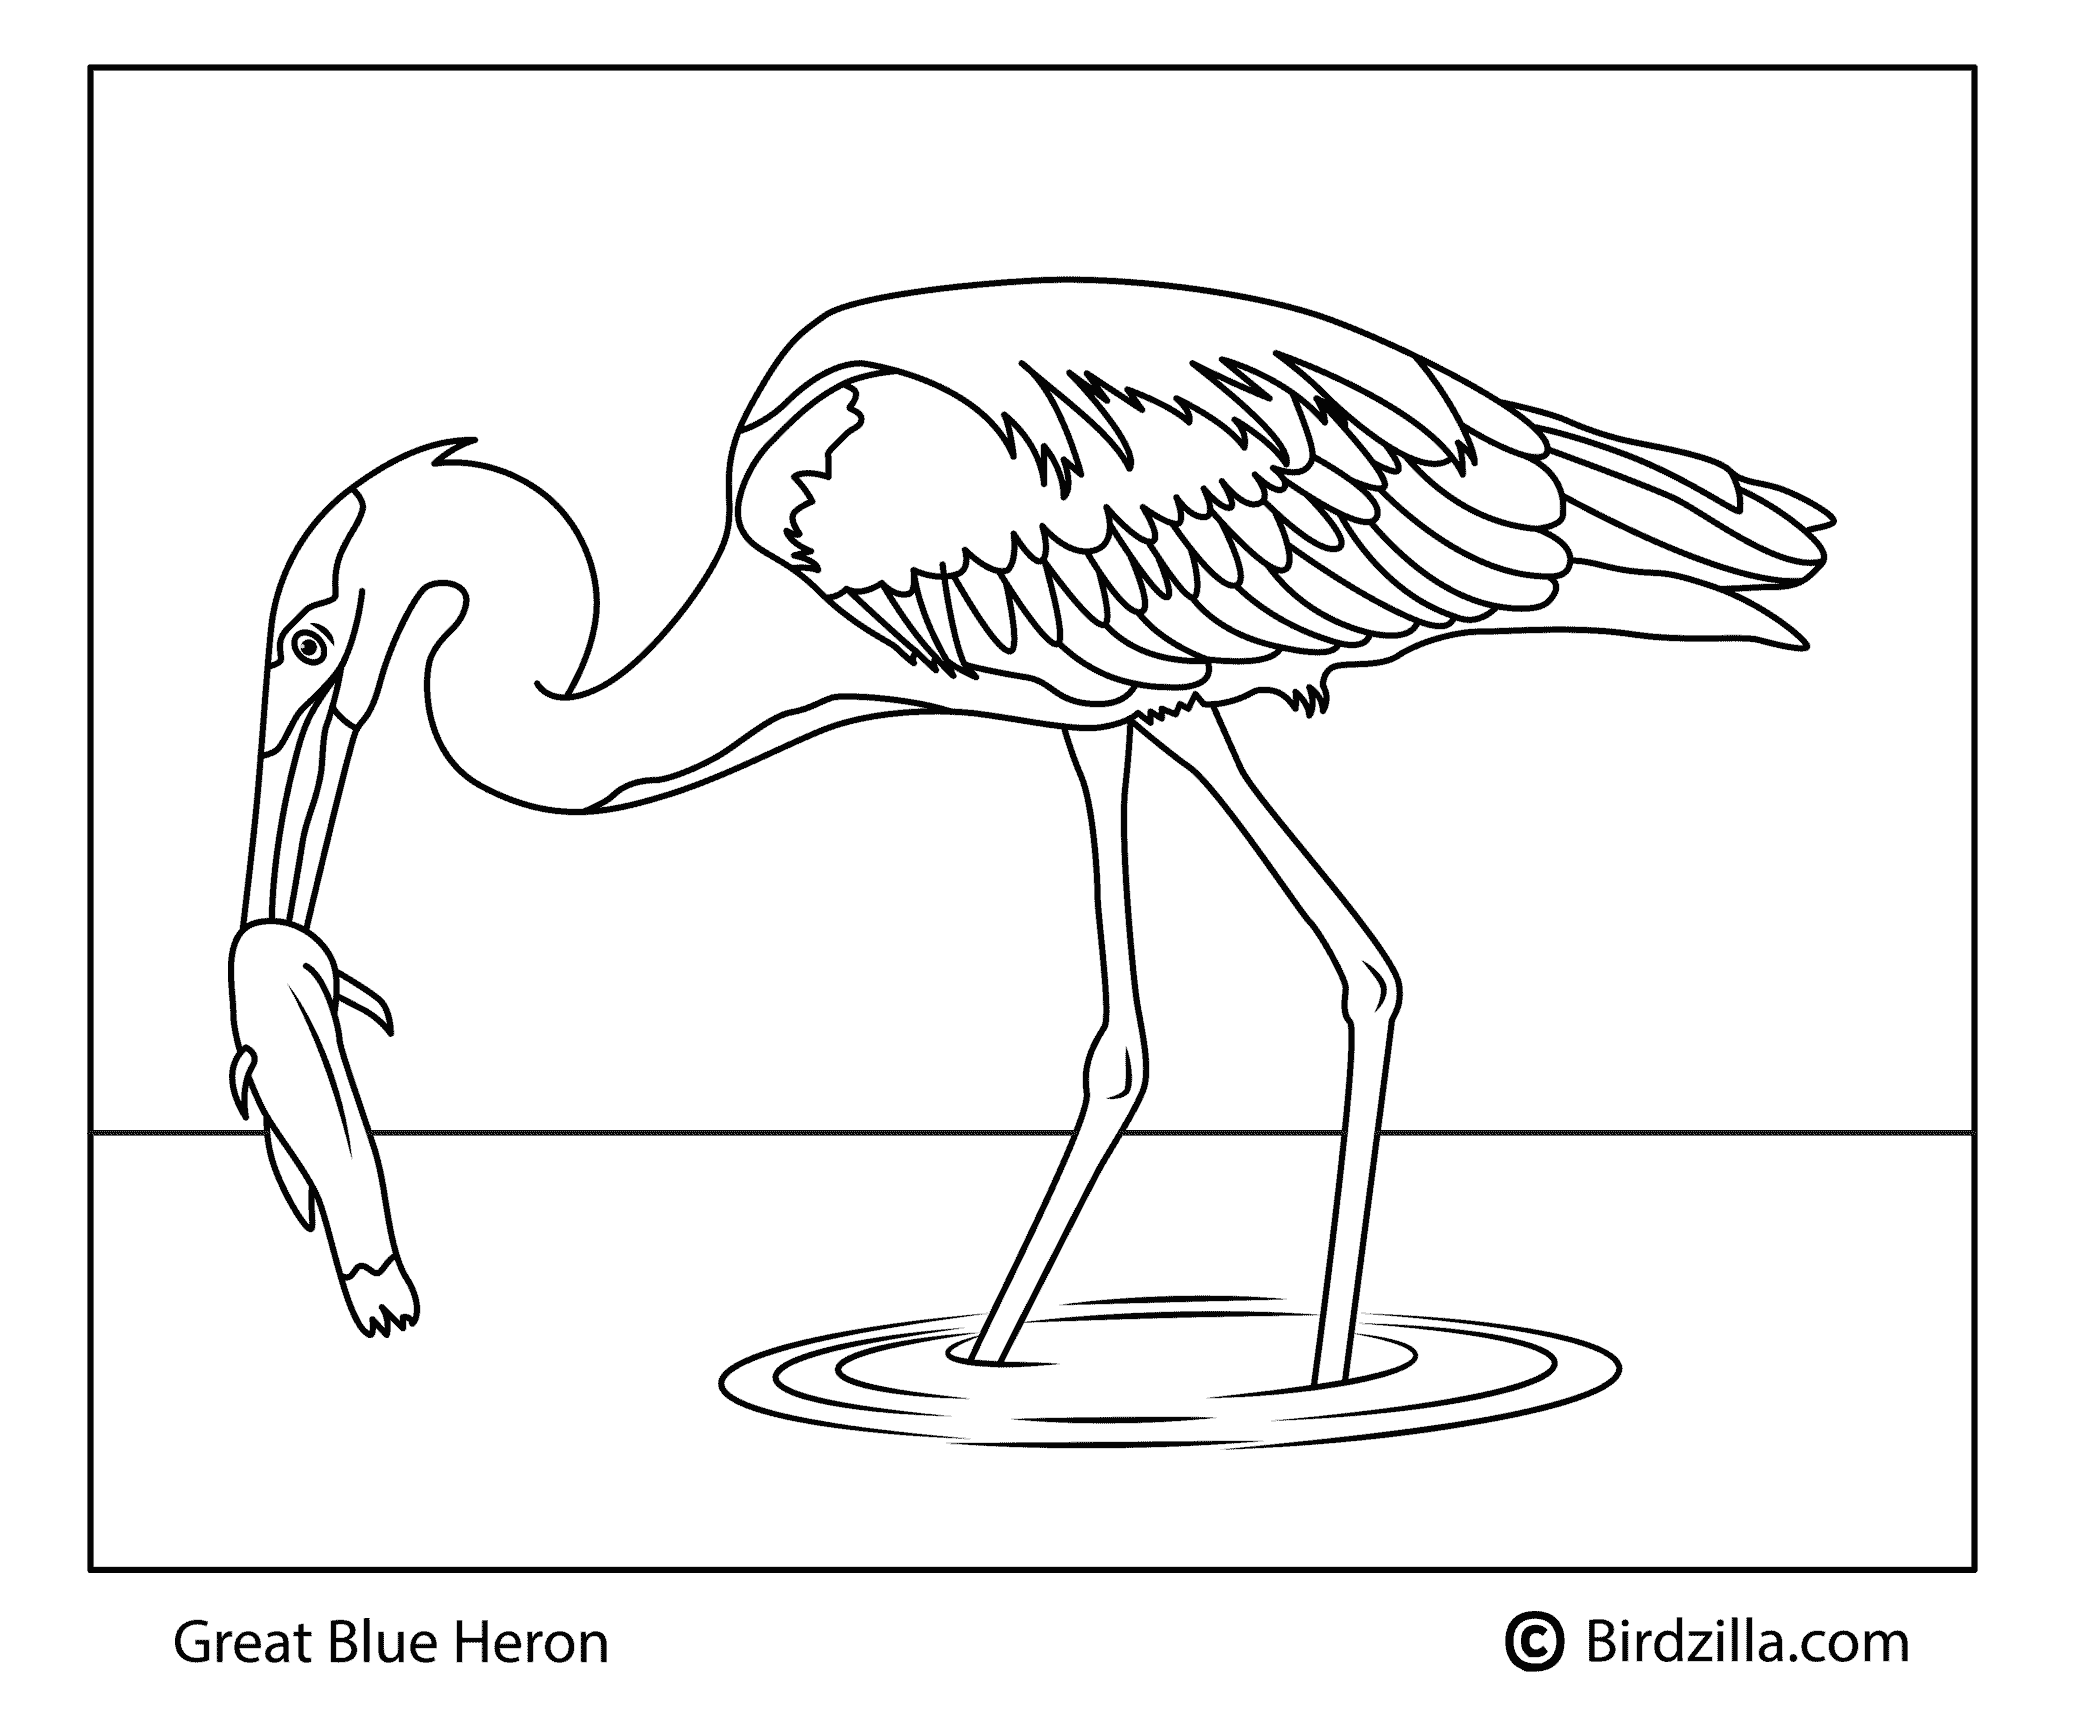 Great blue heron coloring page